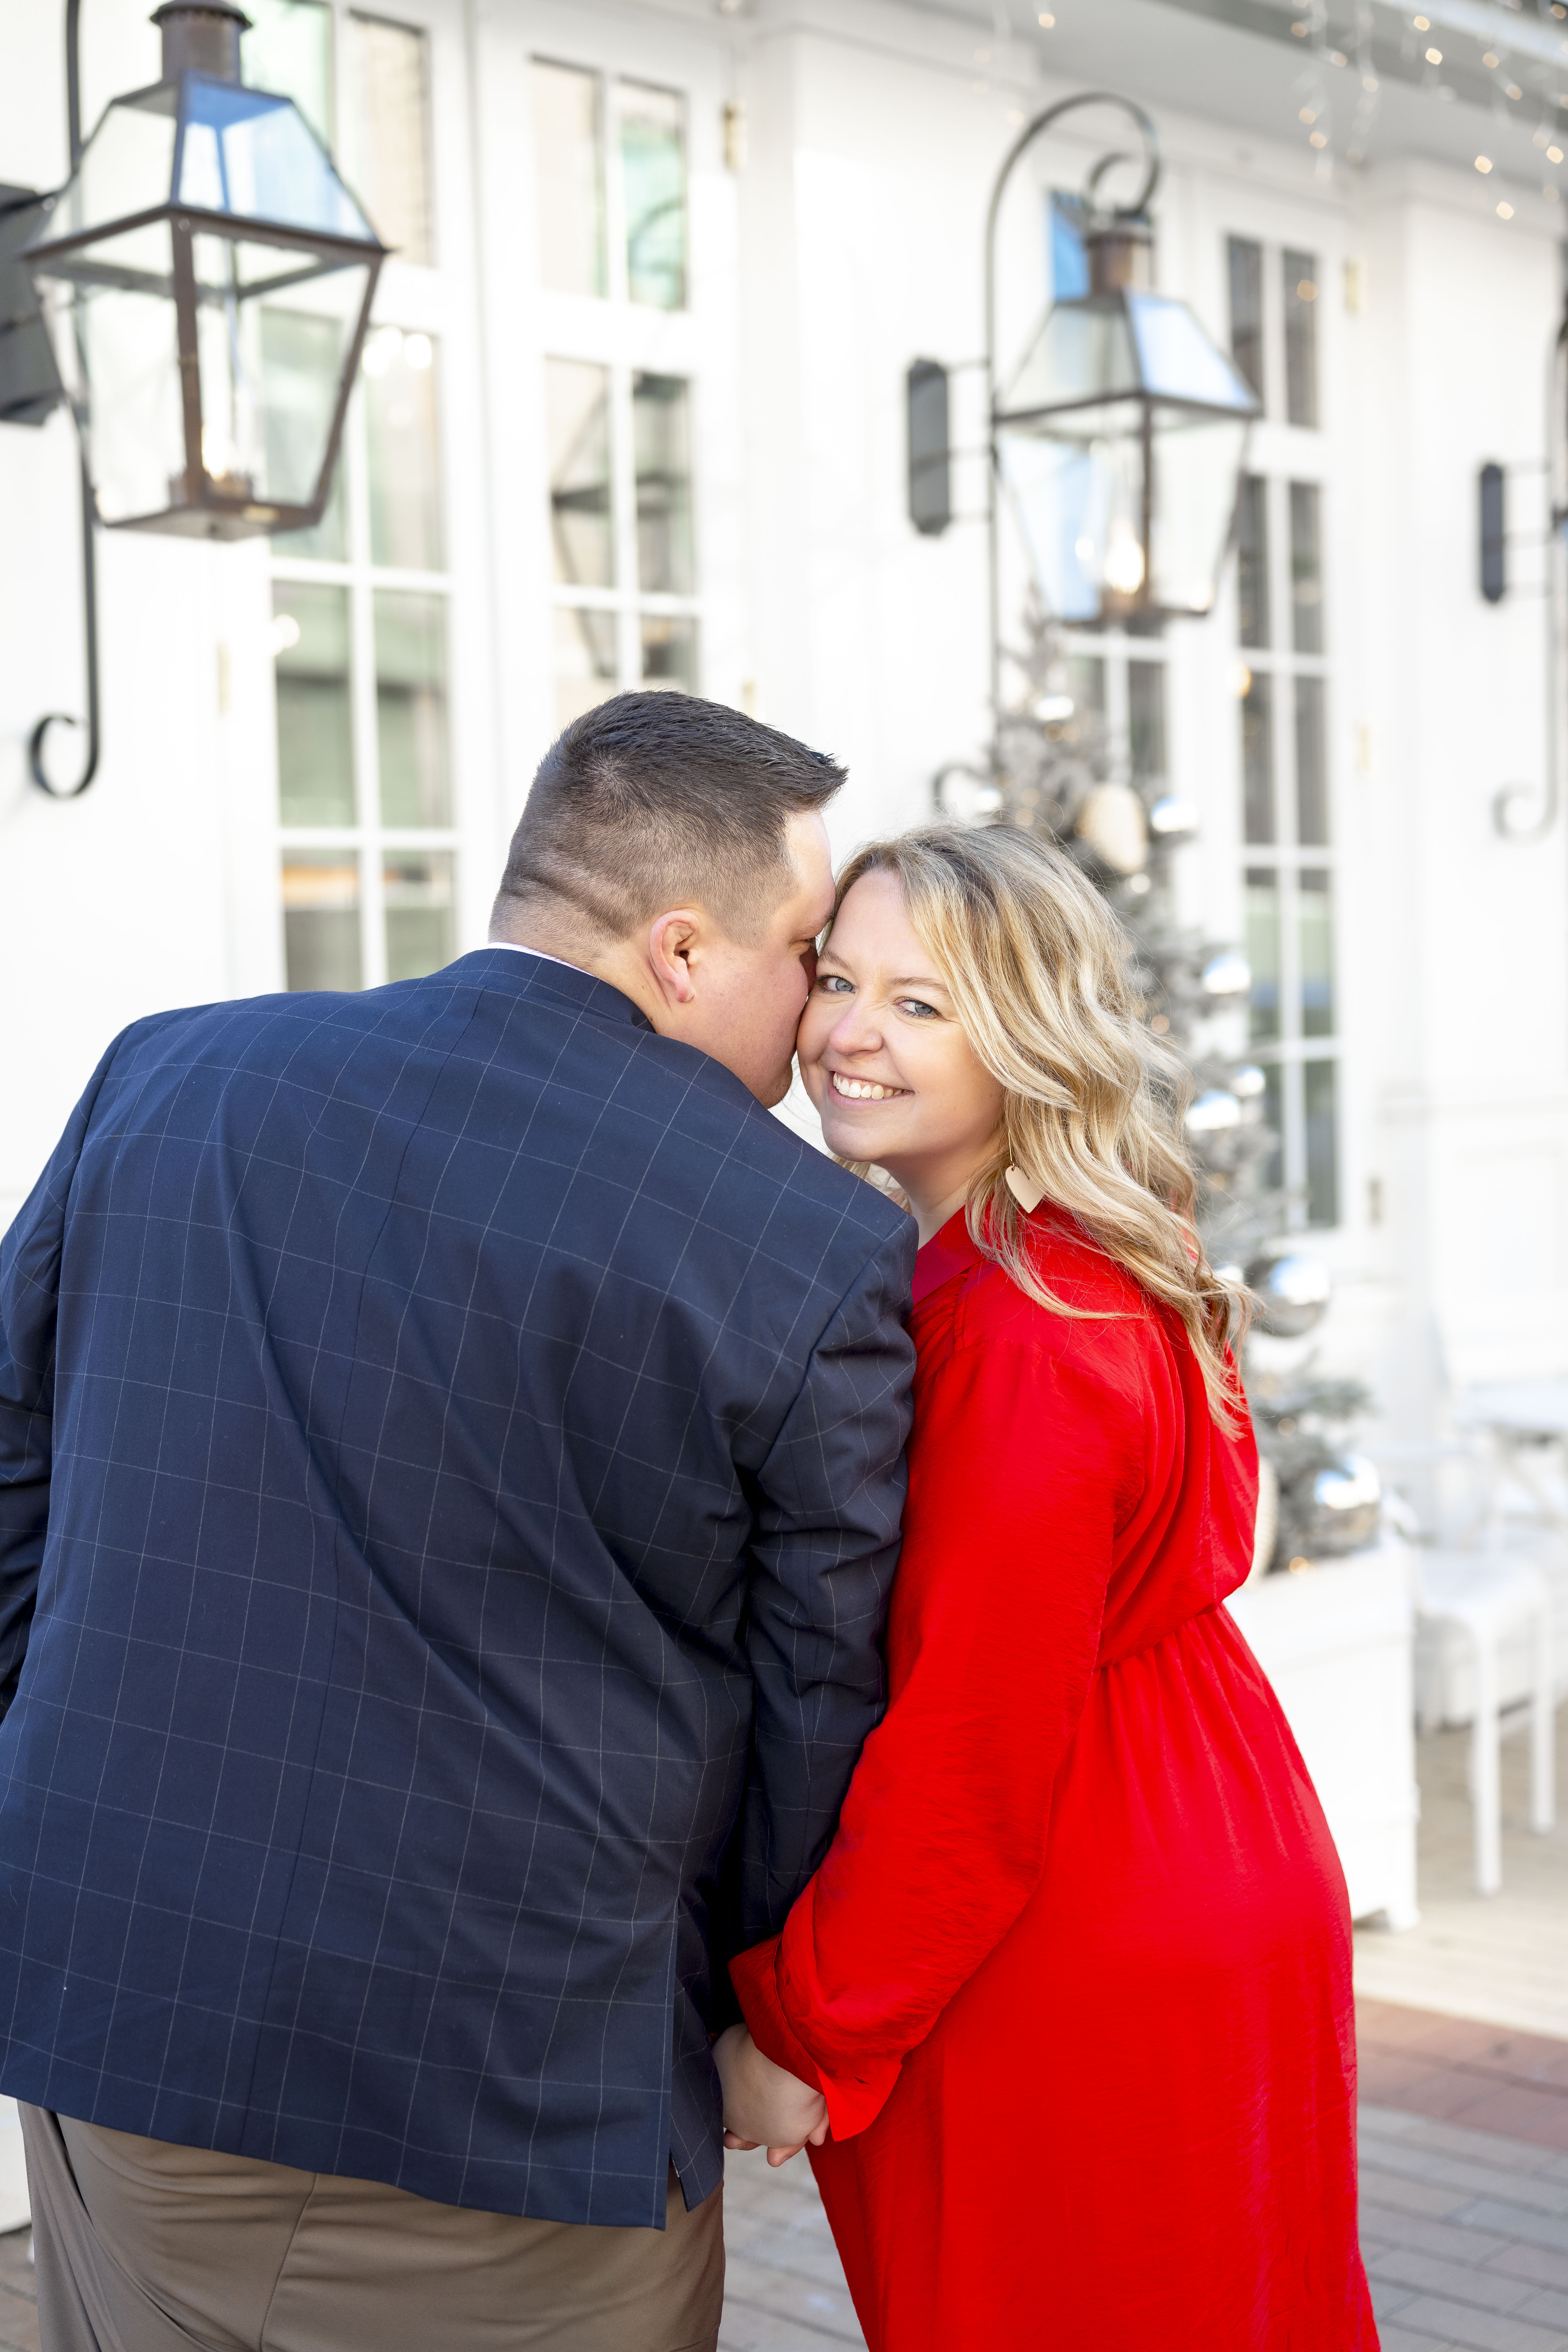 A Carmel Indiana Engagement Session at the Cake Bake Shop and Palladium